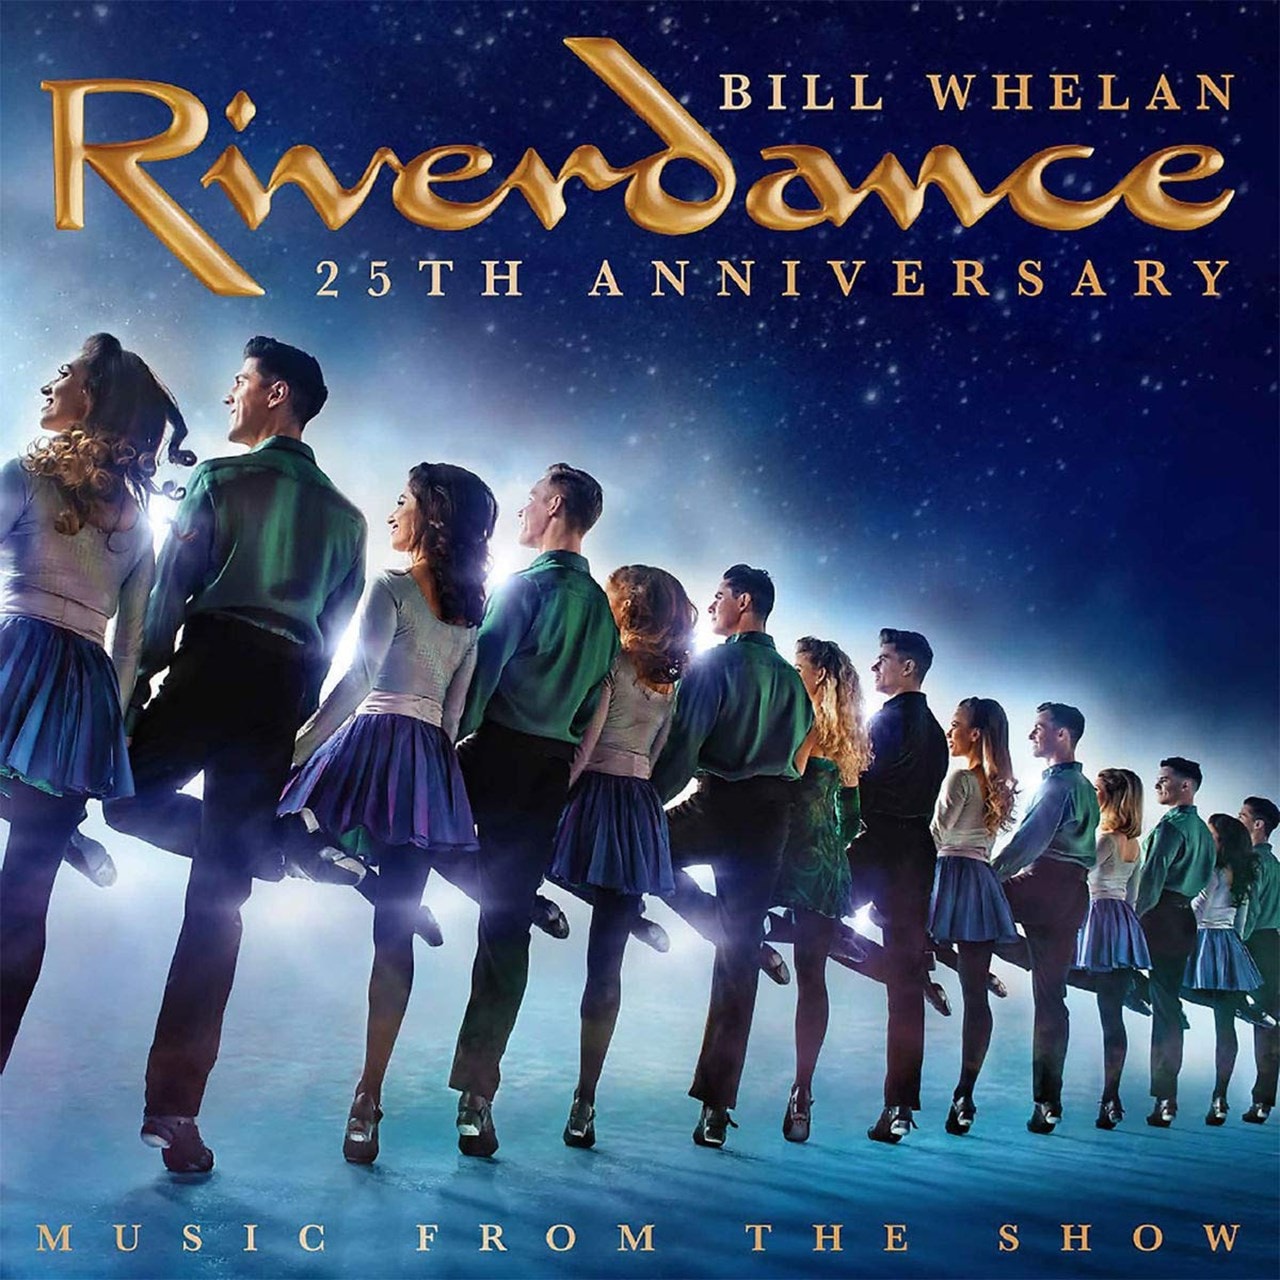 Riverdance Music from the Show CD Album Free shipping over £20